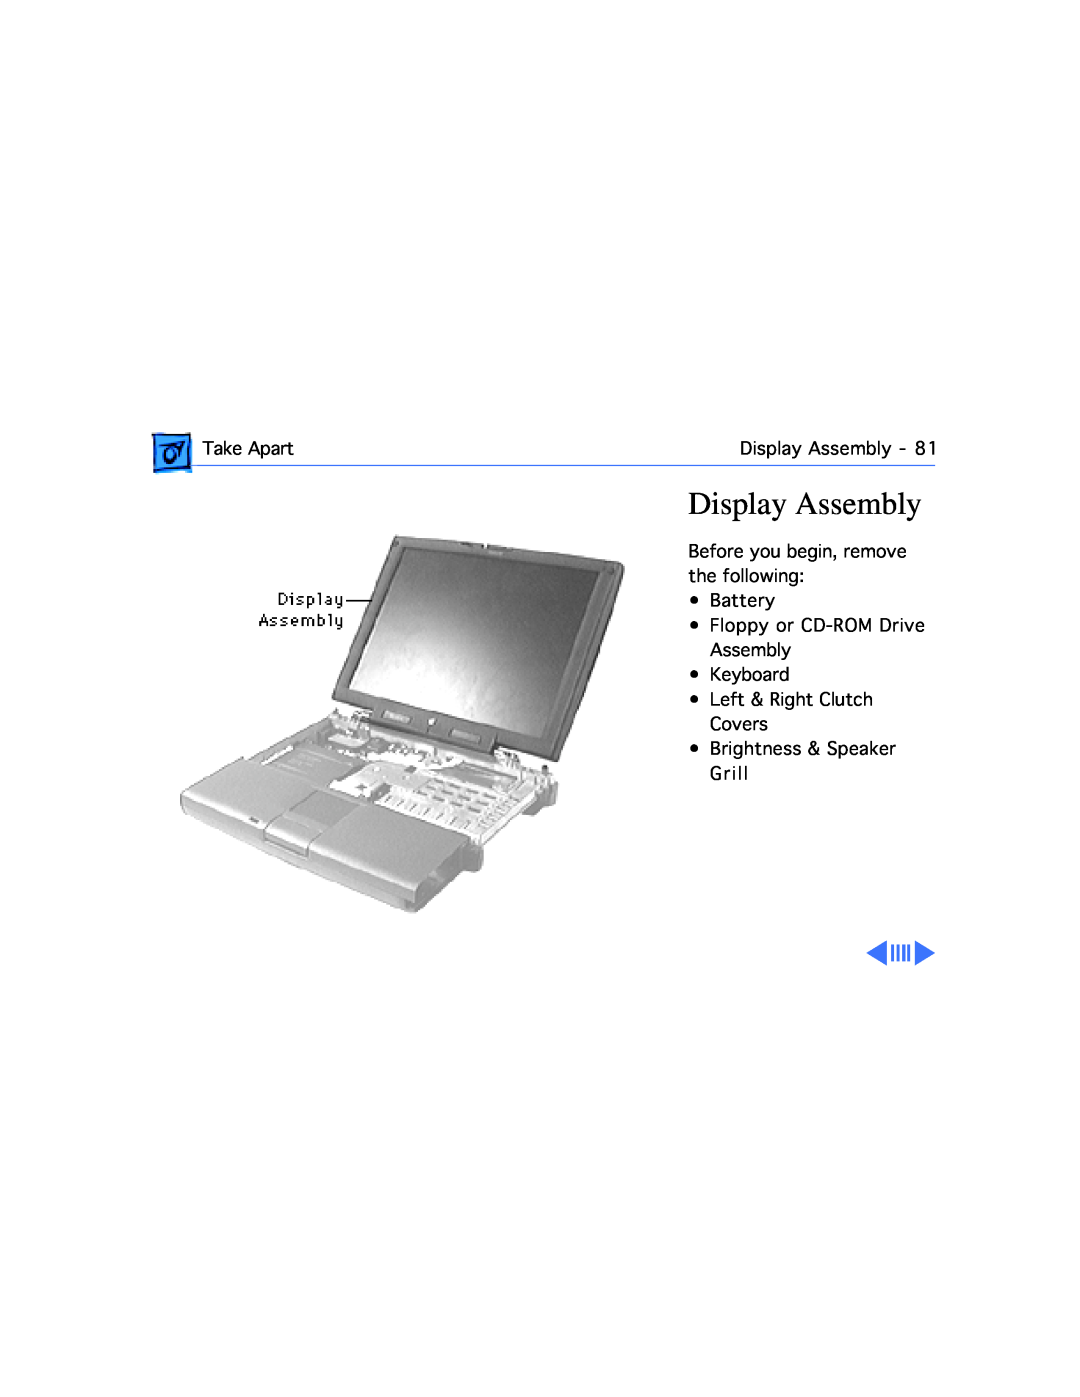 Apple G3, 3400C/200 manual Take ApartDisplay Assembly, Floppy or CD-ROM Drive Assembly Keyboard Left & Right Clutch Covers 